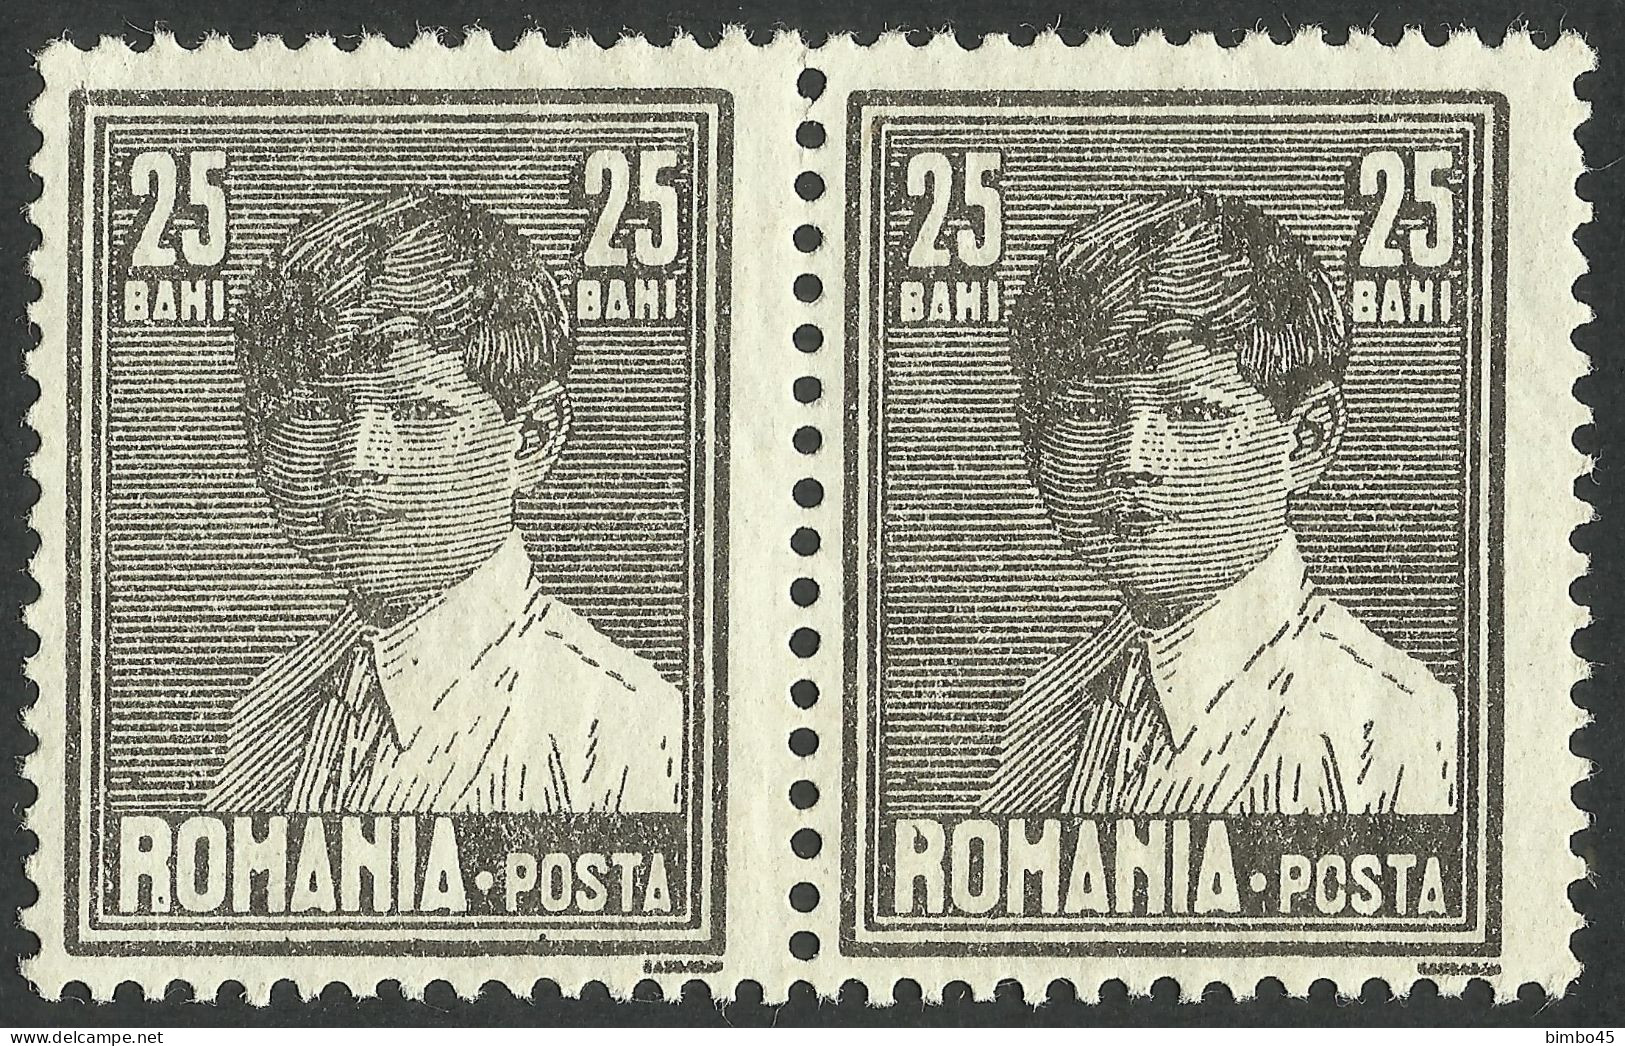 Error  ROMANIA 1928 MIHAI with letter "O" Cut and oblique in "R"  - pair MNH -  perforated 13.1/2, size 19mm x 24.5m